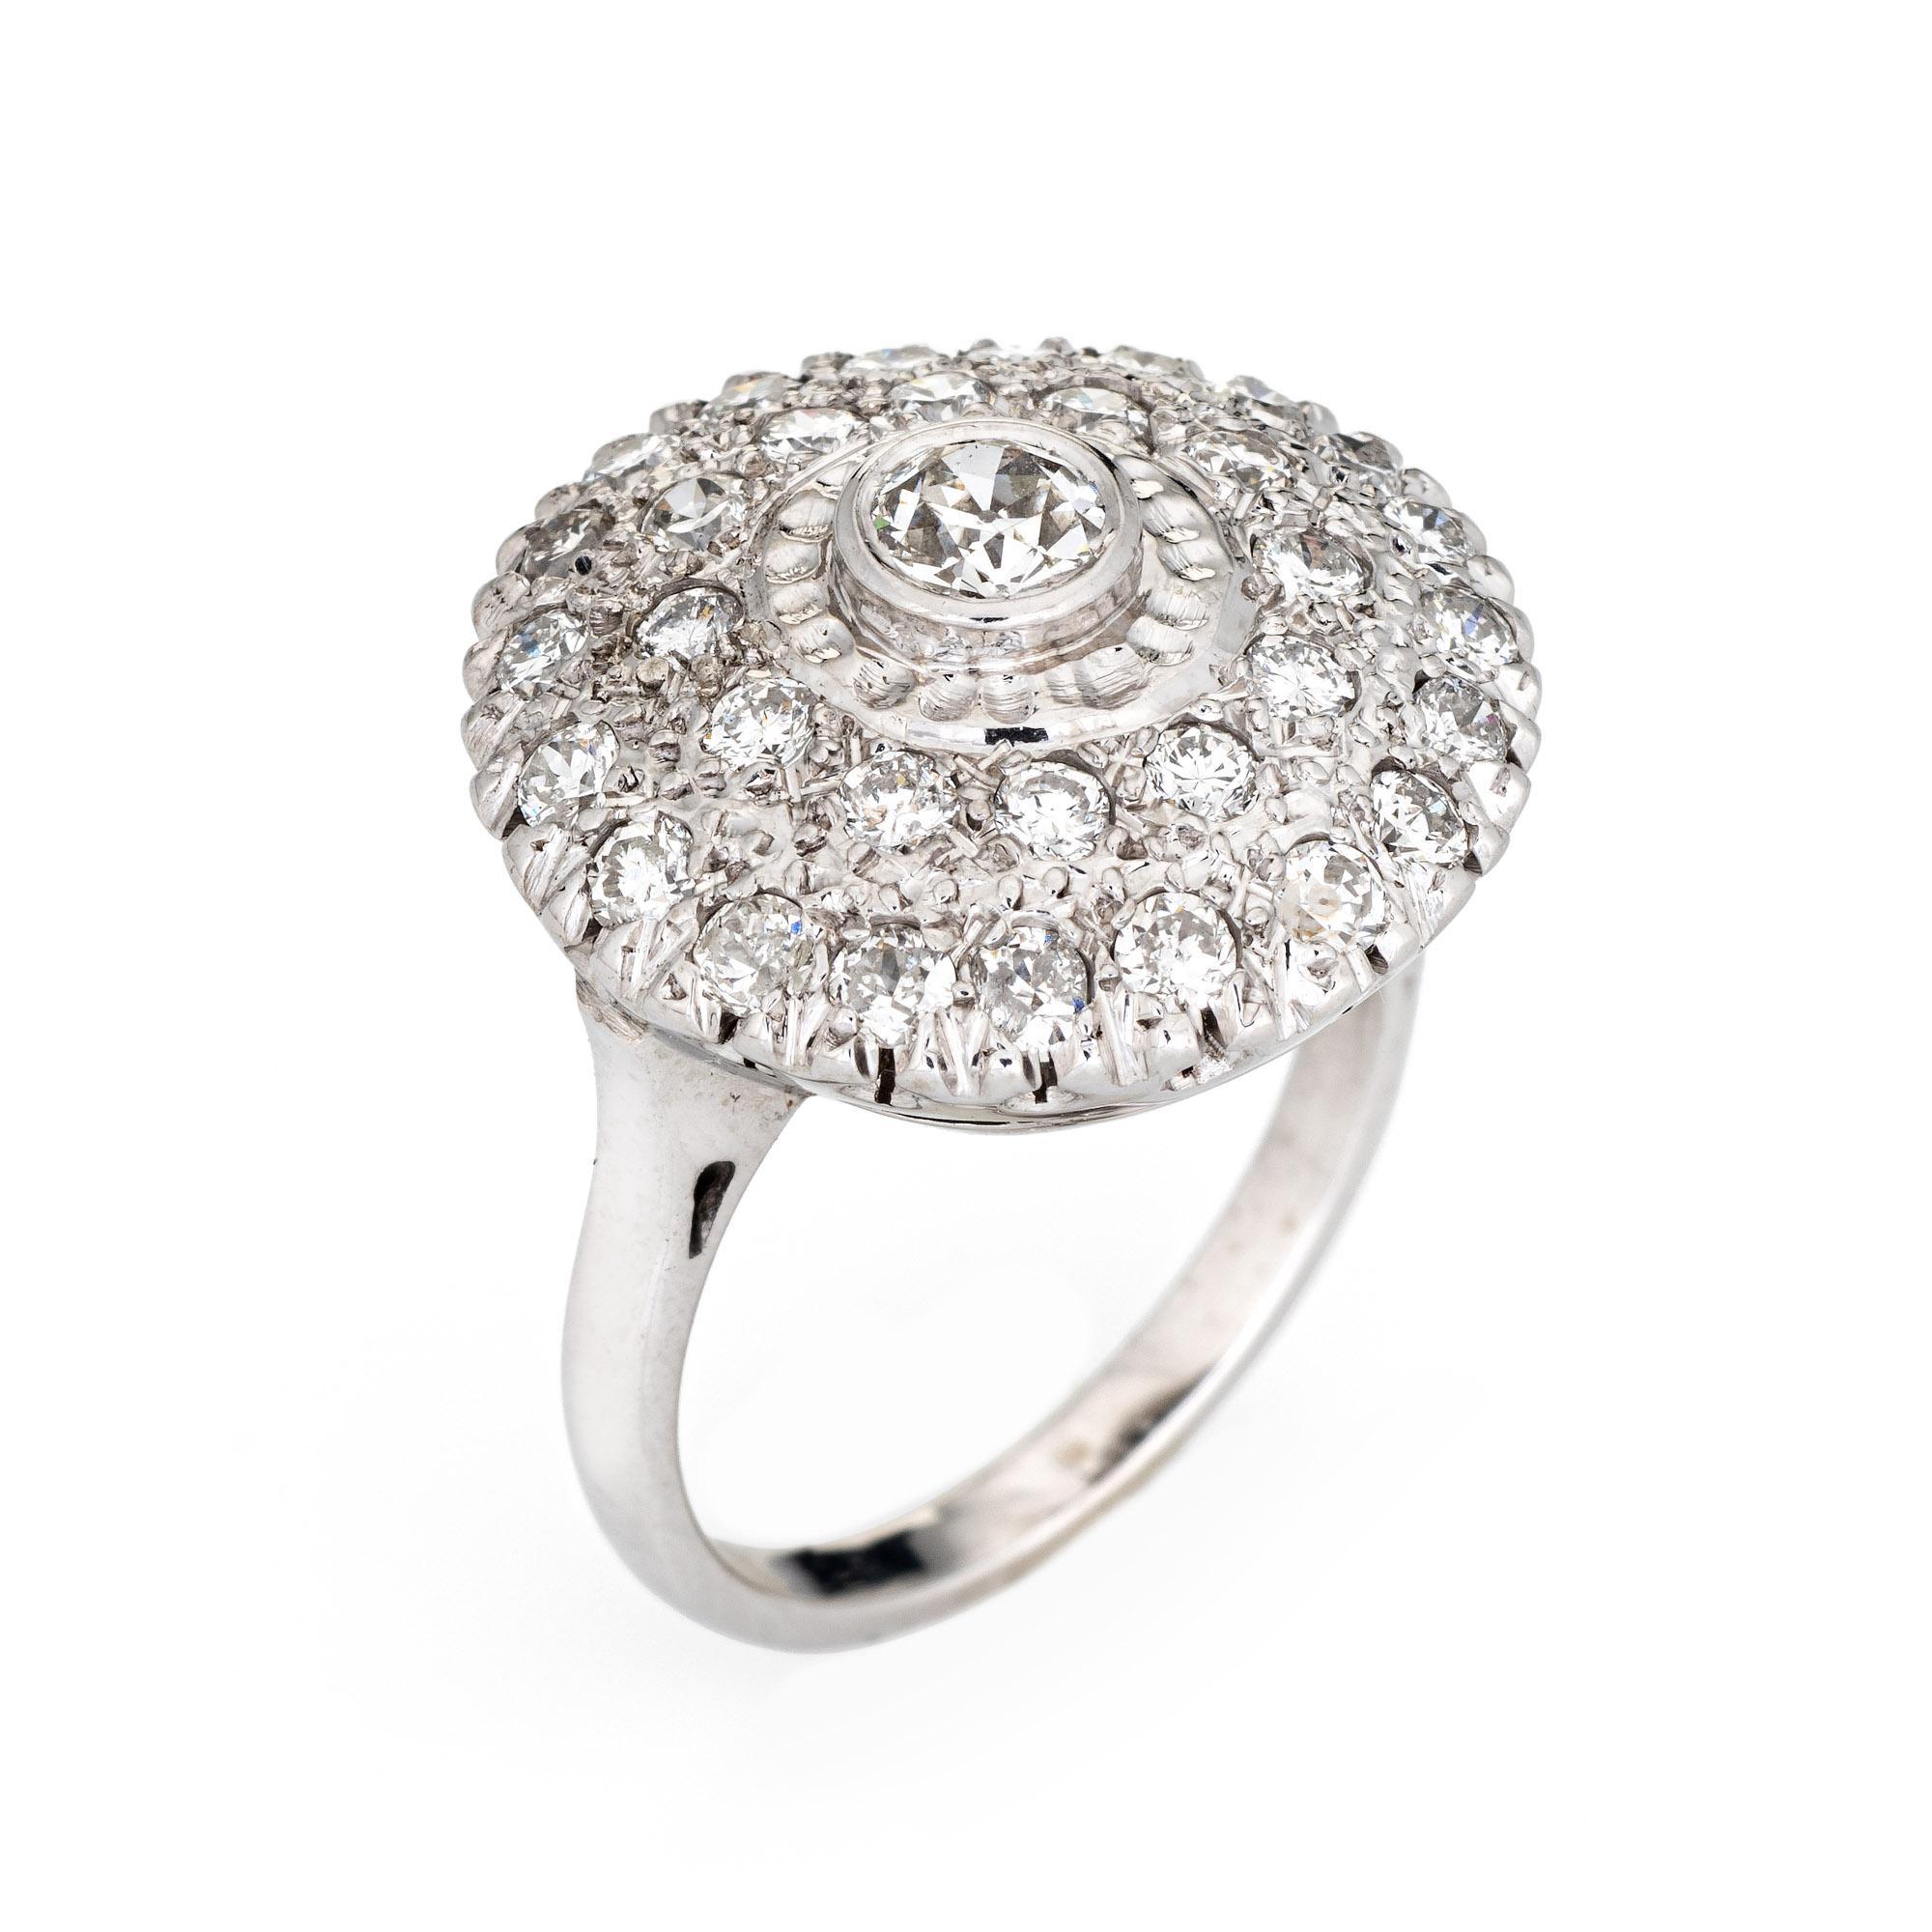 Stylish vintage diamond cluster ring (circa 1950s to 1960s) crafted in 14 karat white gold. 

Centrally mounted estimated 0.20 carat old European cut diamond is accented with an estimated 0.65 carats of diamonds. The total diamond weight is